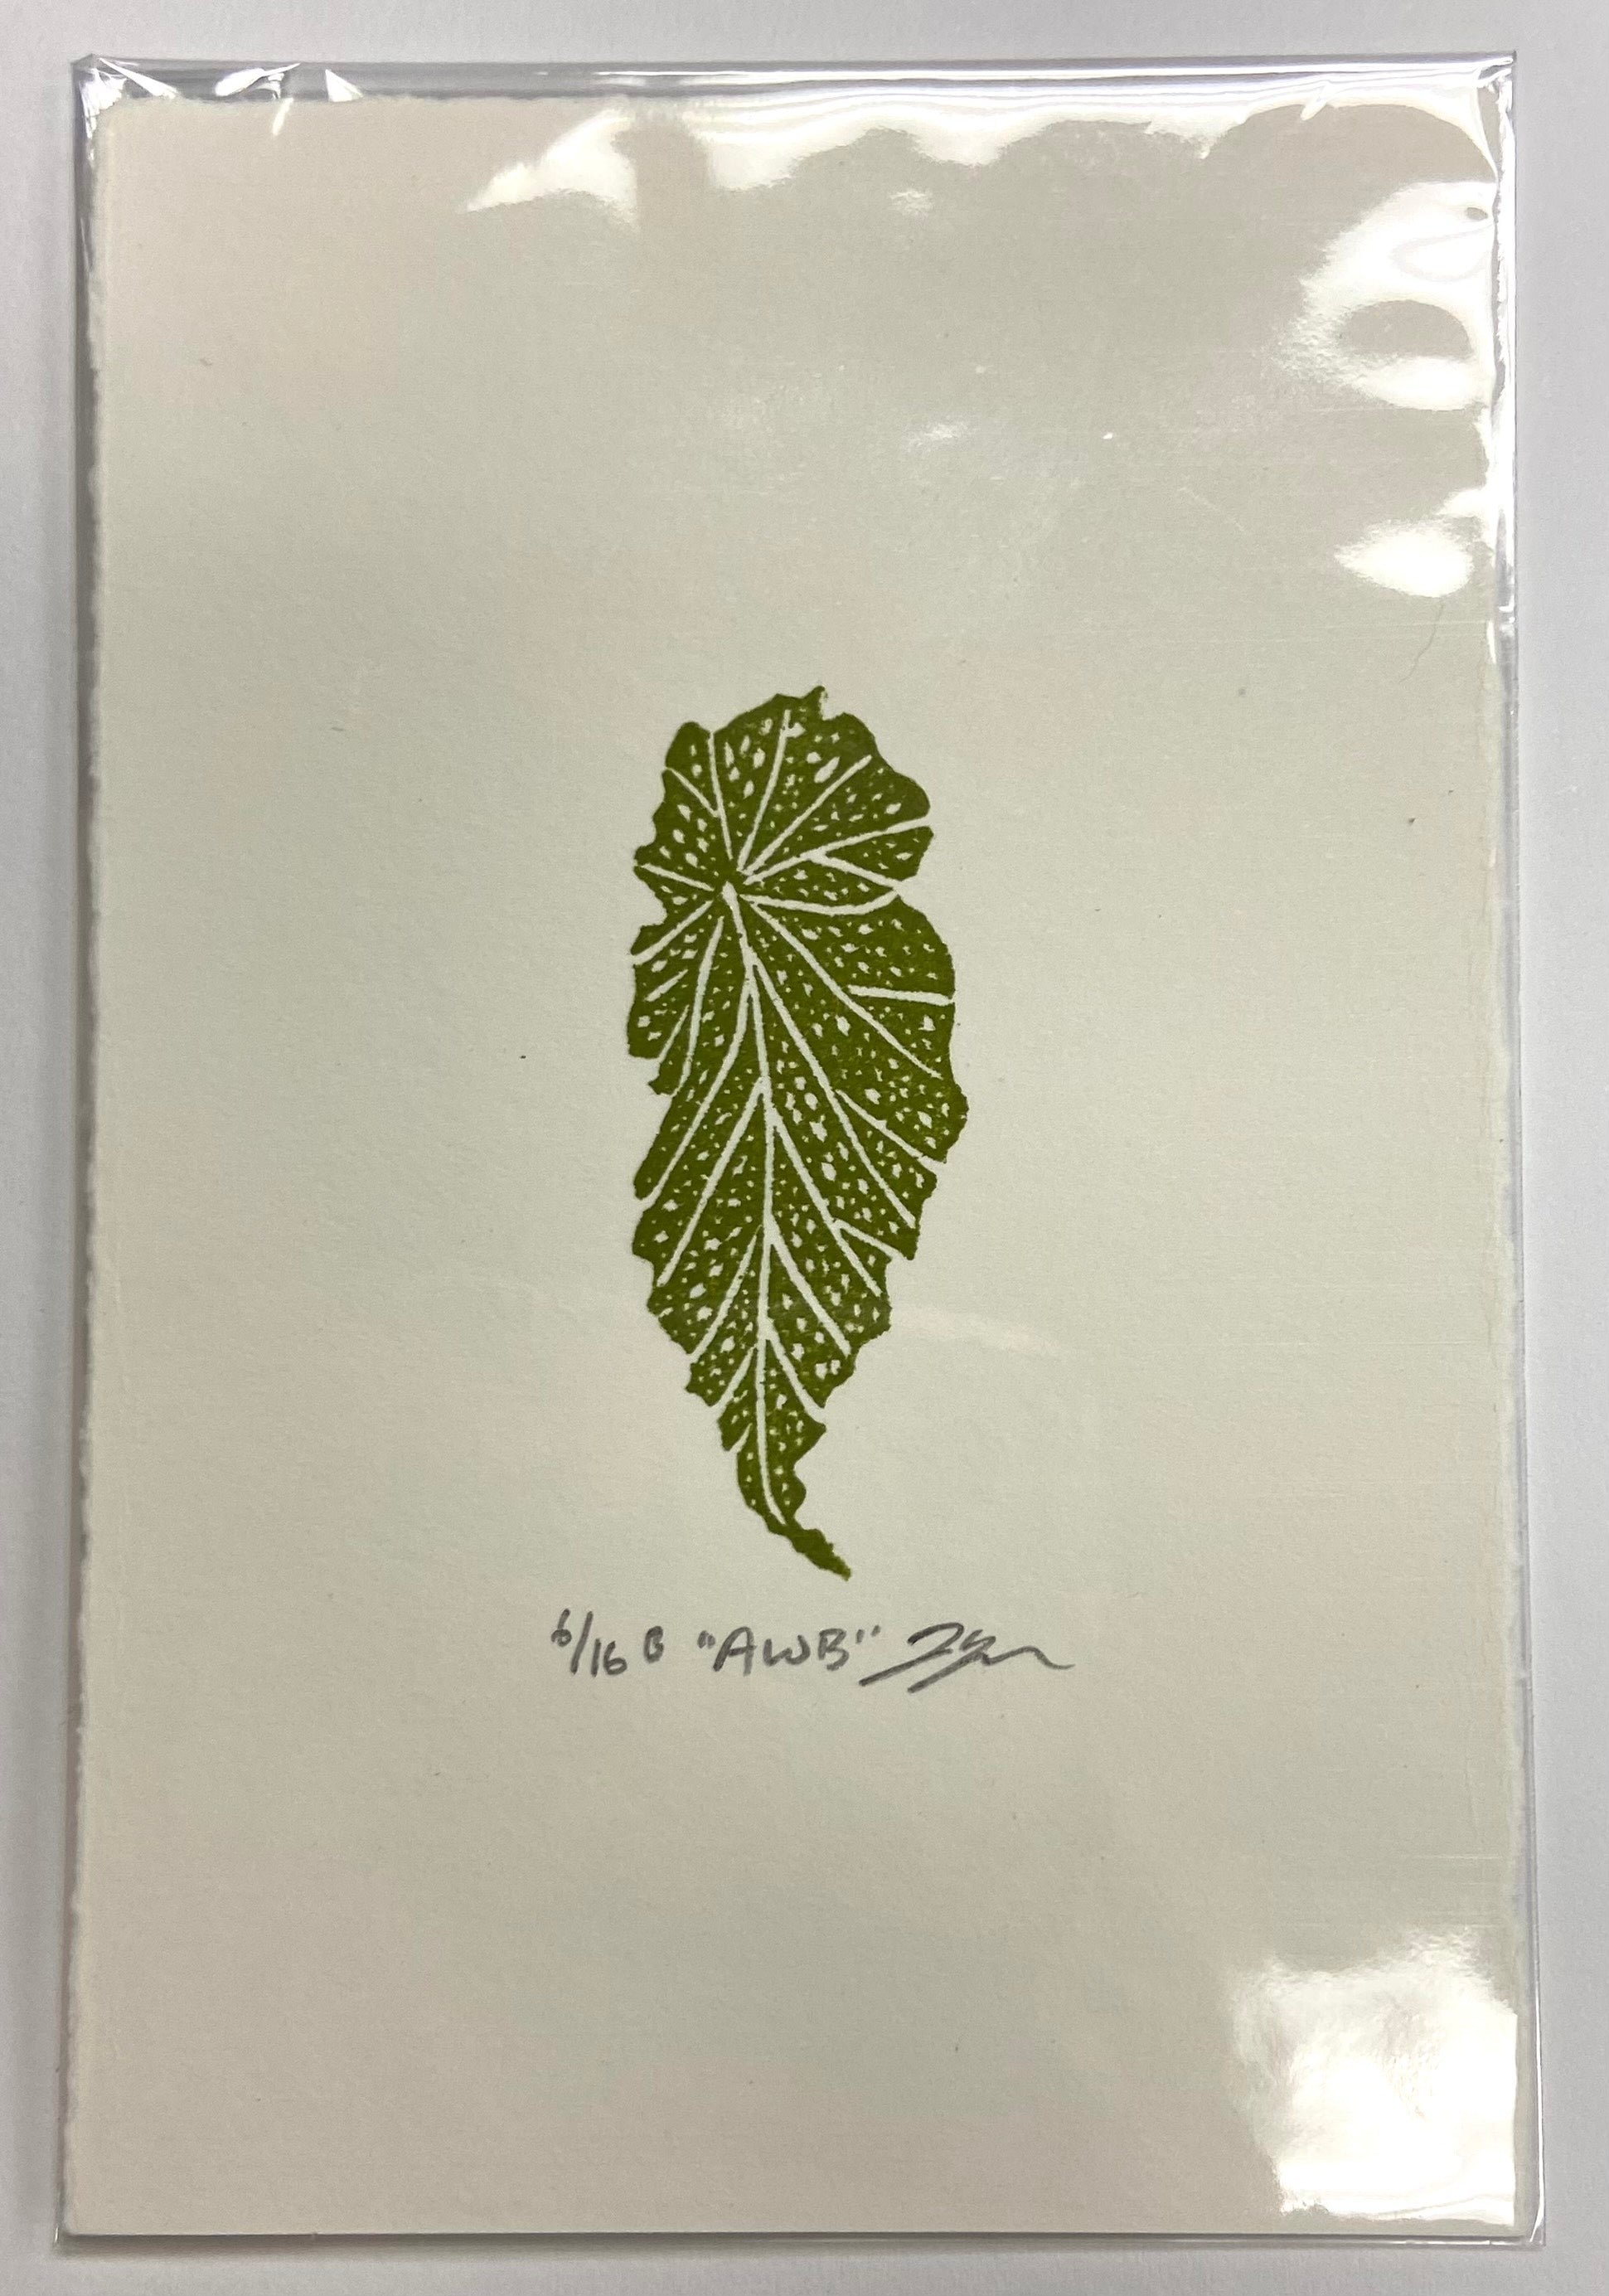 An olive green relief print of a spotted angel-wing begonia leaf. The prints are made by hand with carved erasers and are signed, numbered, and titled. 